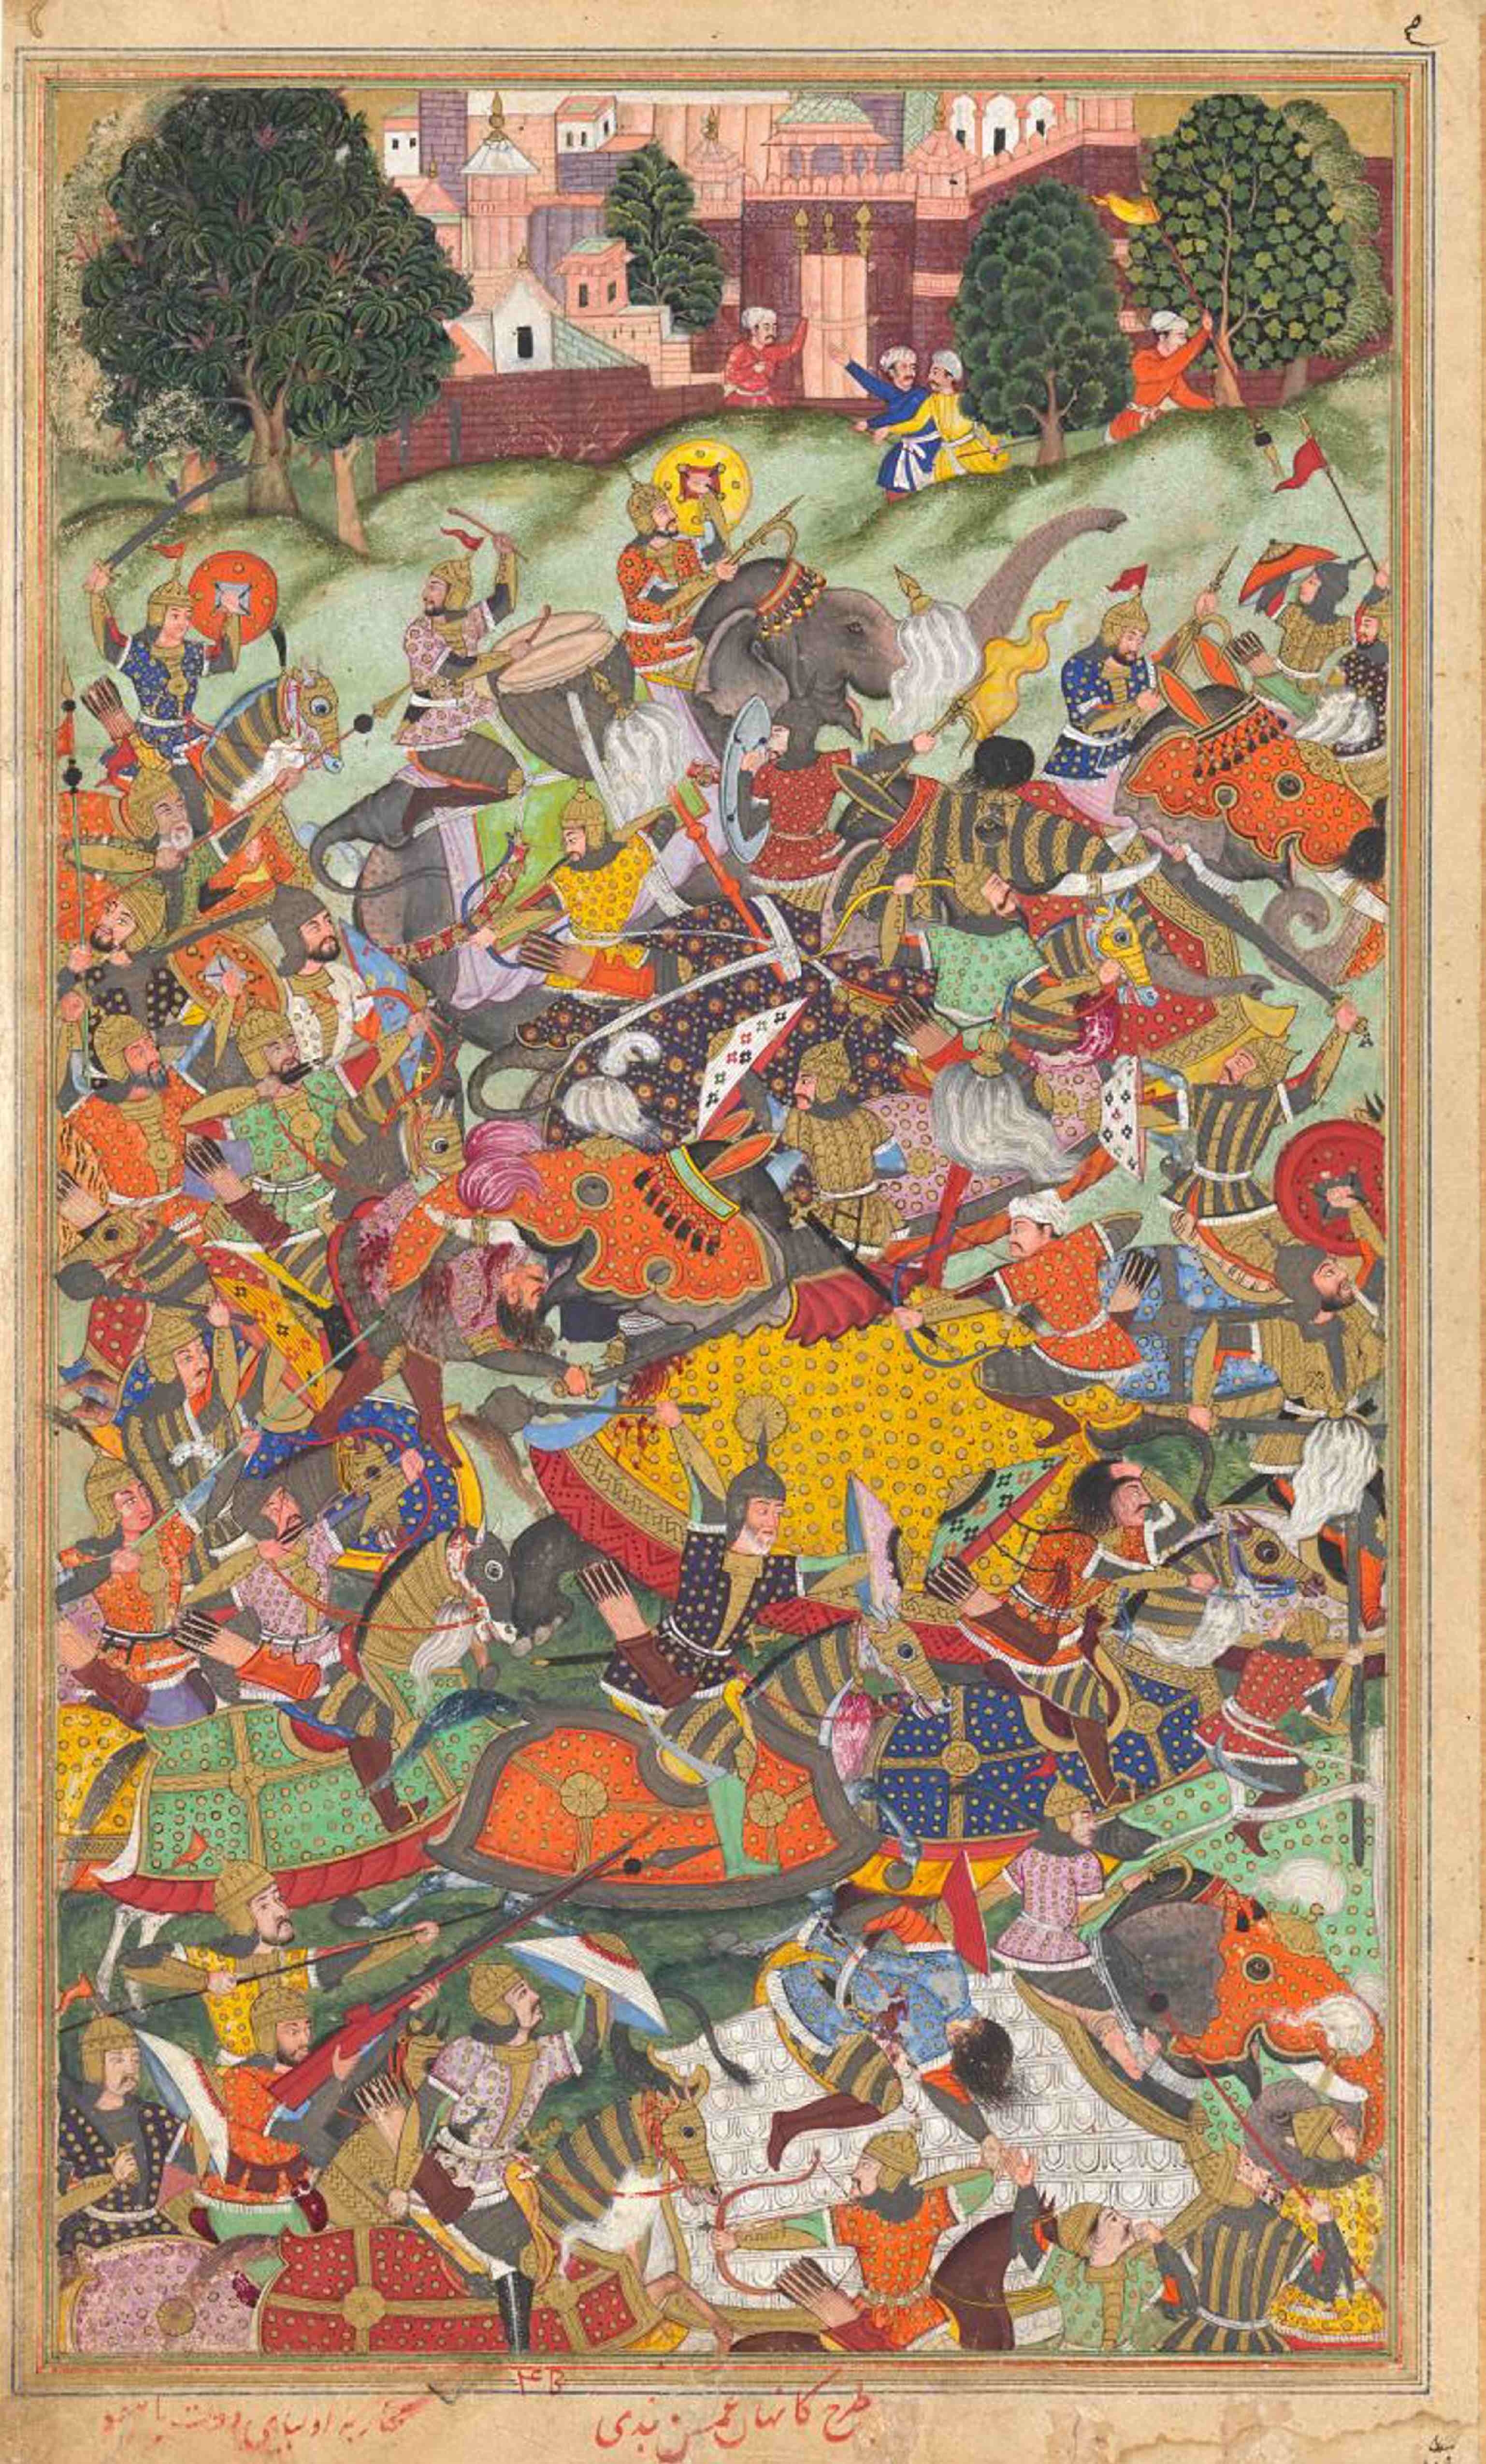 Illustration of a historic battle scene with numerous figures on horseback engaging in combat, traditional attire